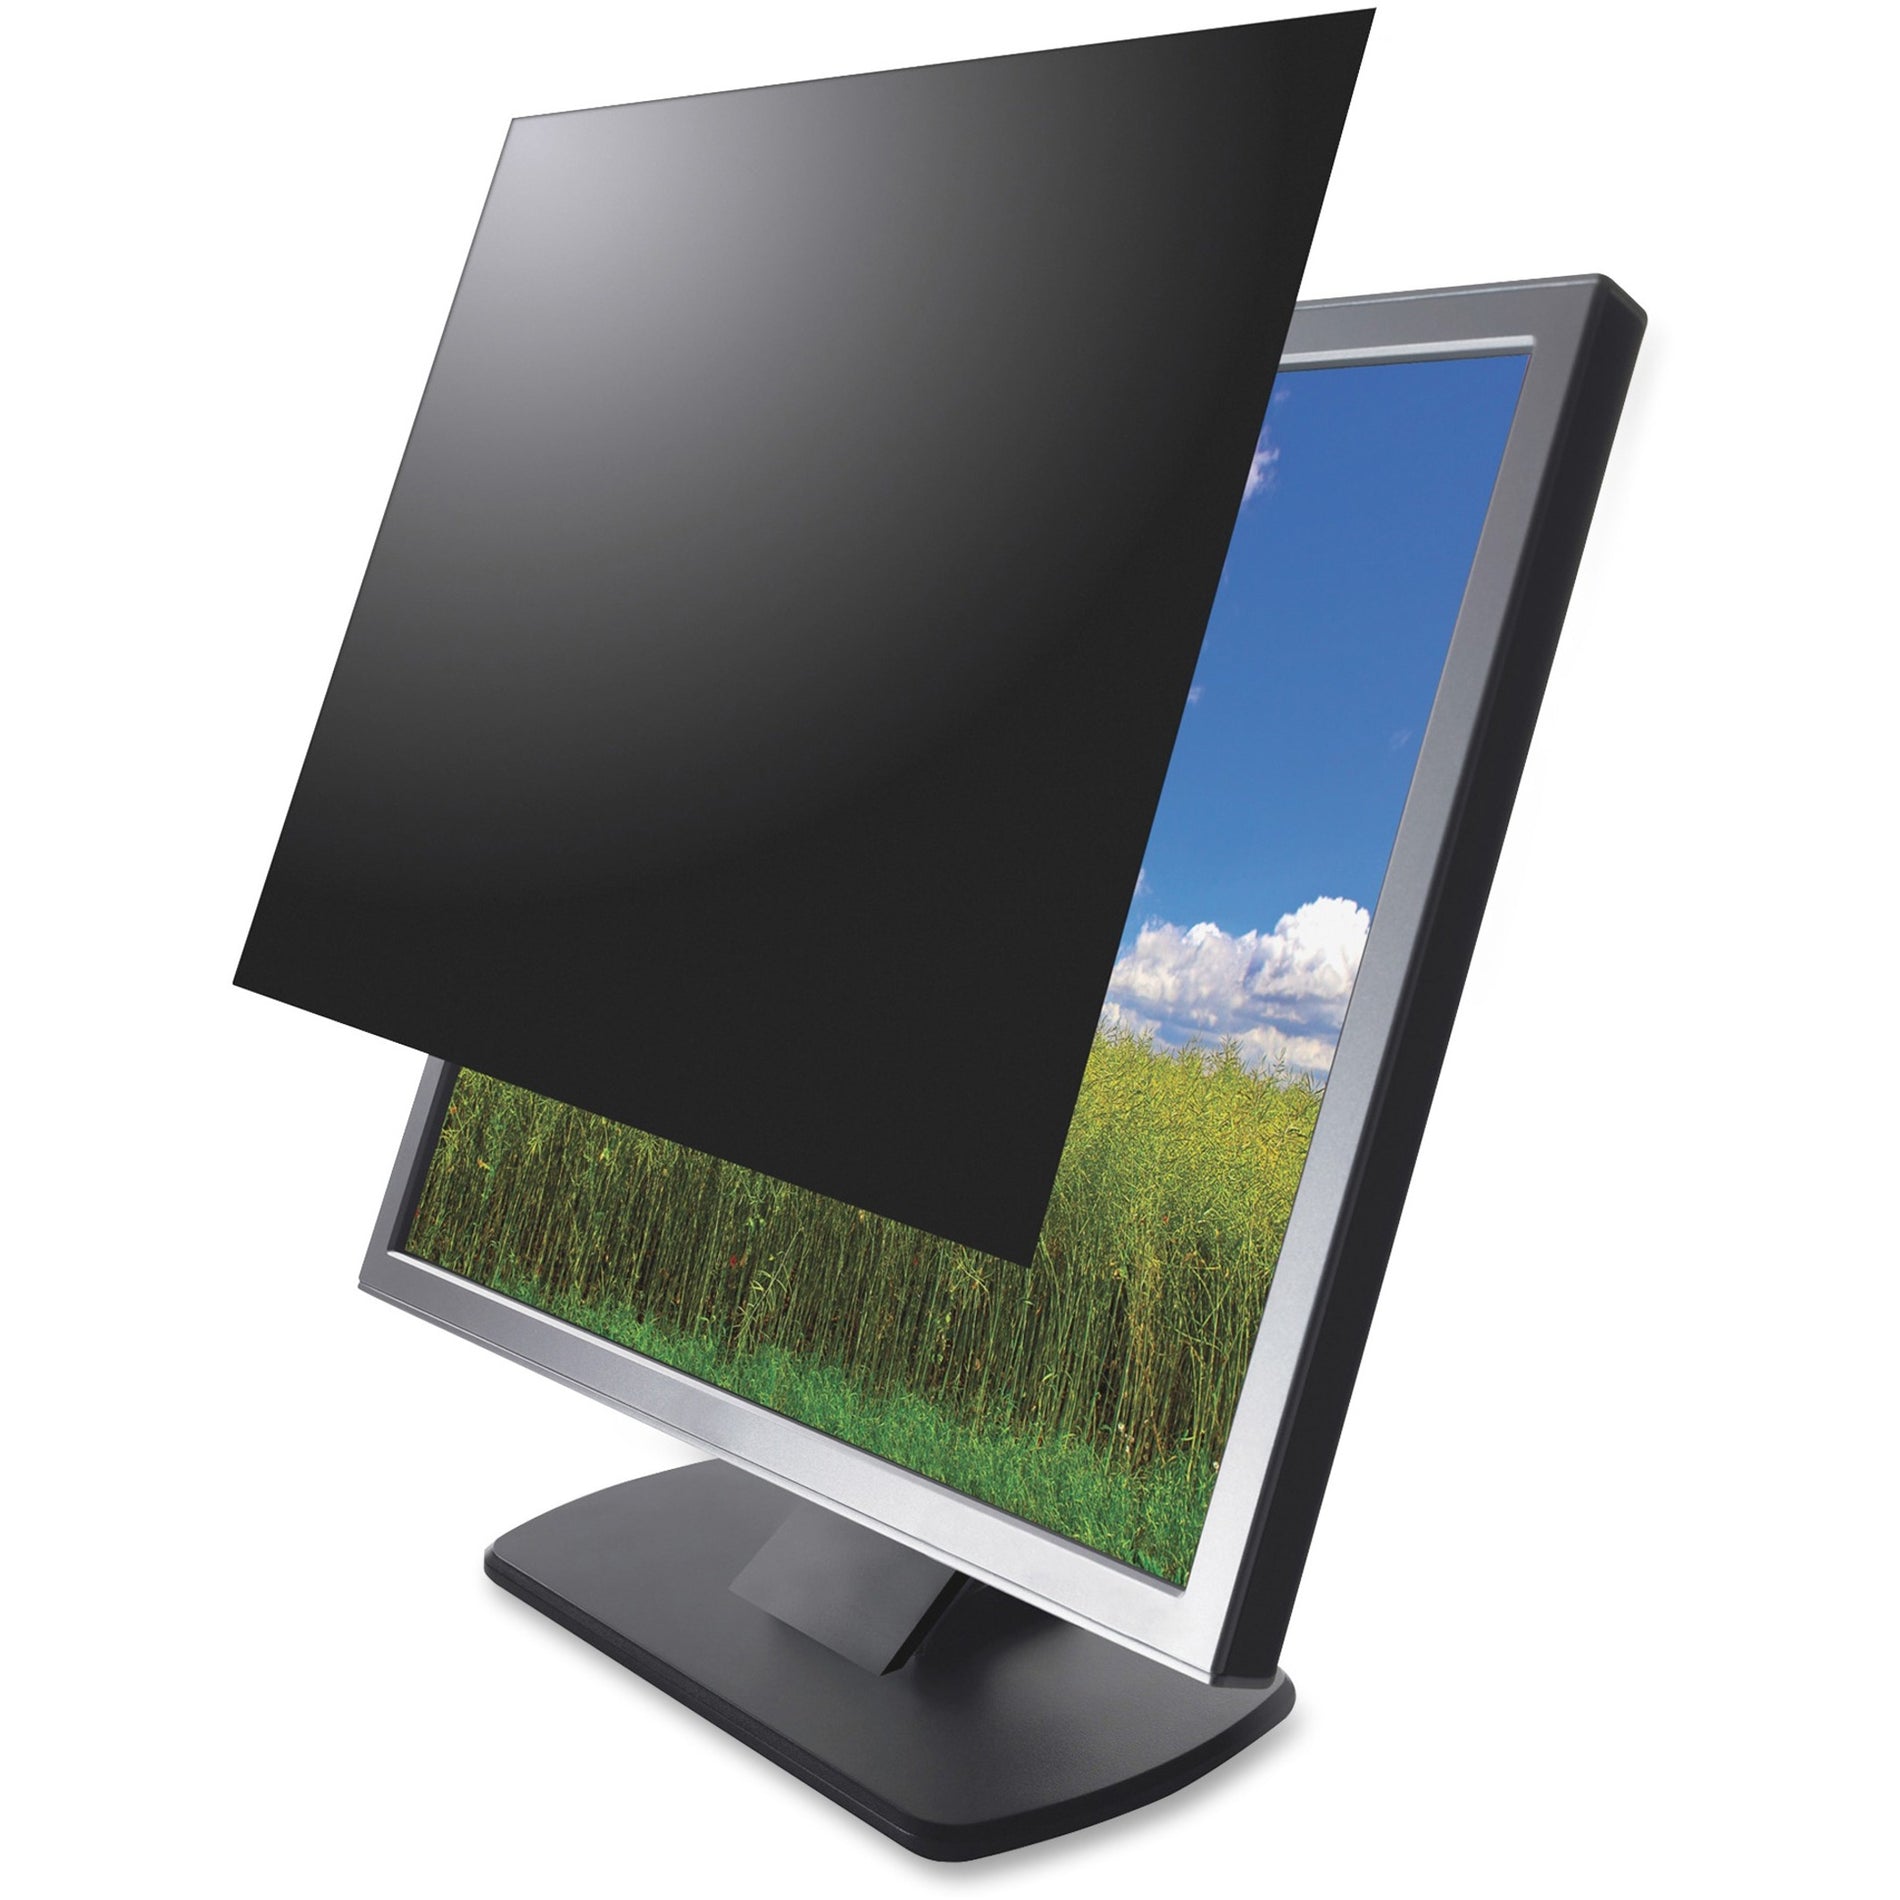 Kantek SVL24W Secure-View Blackout Privacy Filter - Fits 24" Widescreen Monitors, Anti-glare, Microlouver Privacy Technology